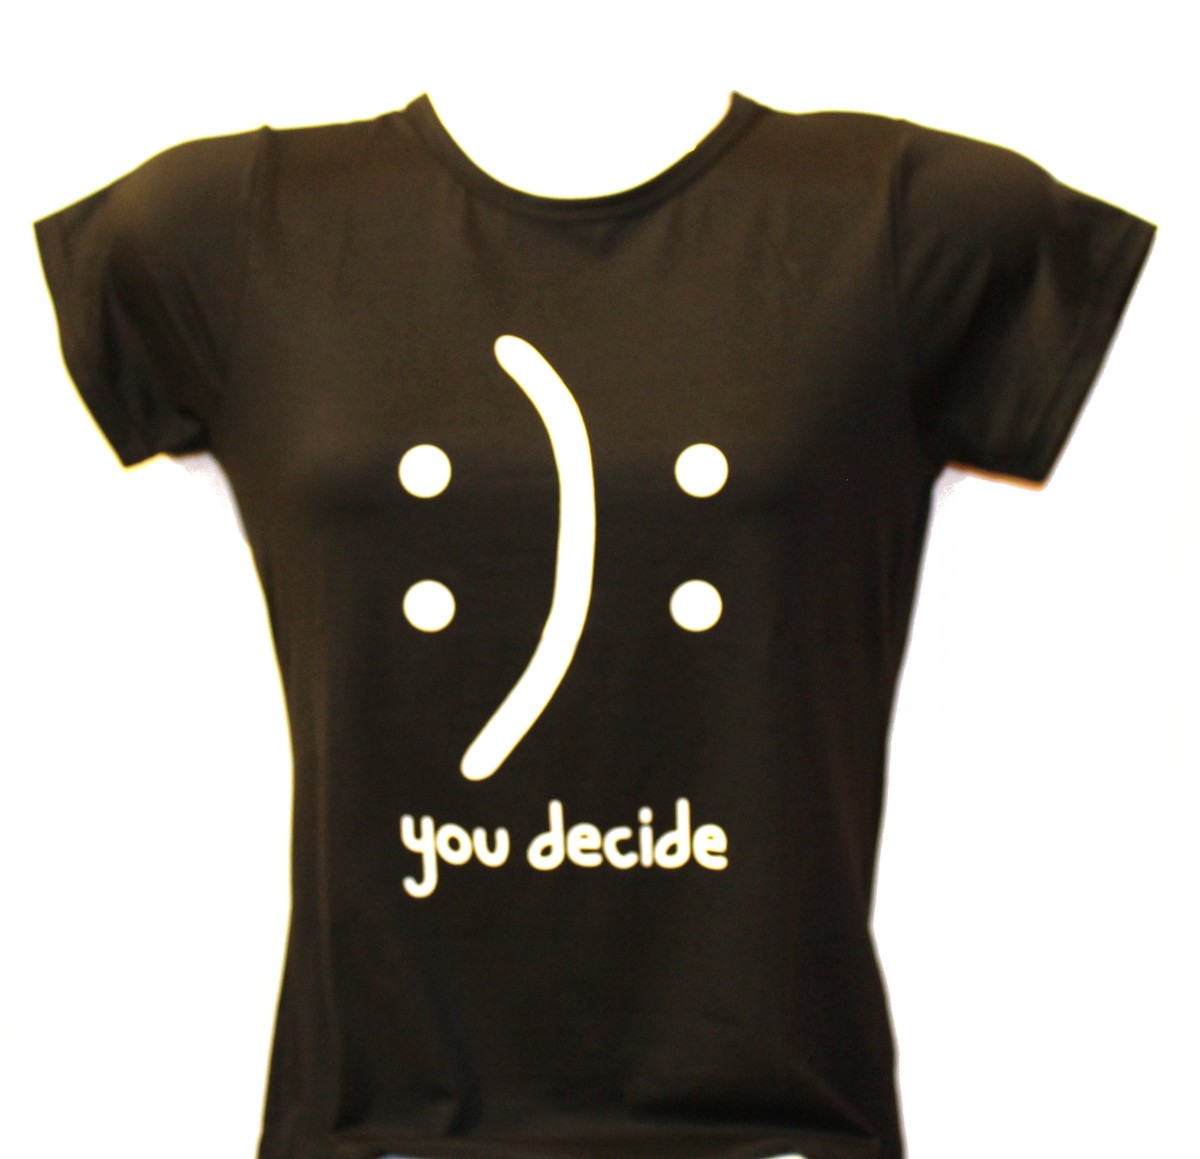 $7.99 - :): You Decide T-Shirt - Tinkersphere